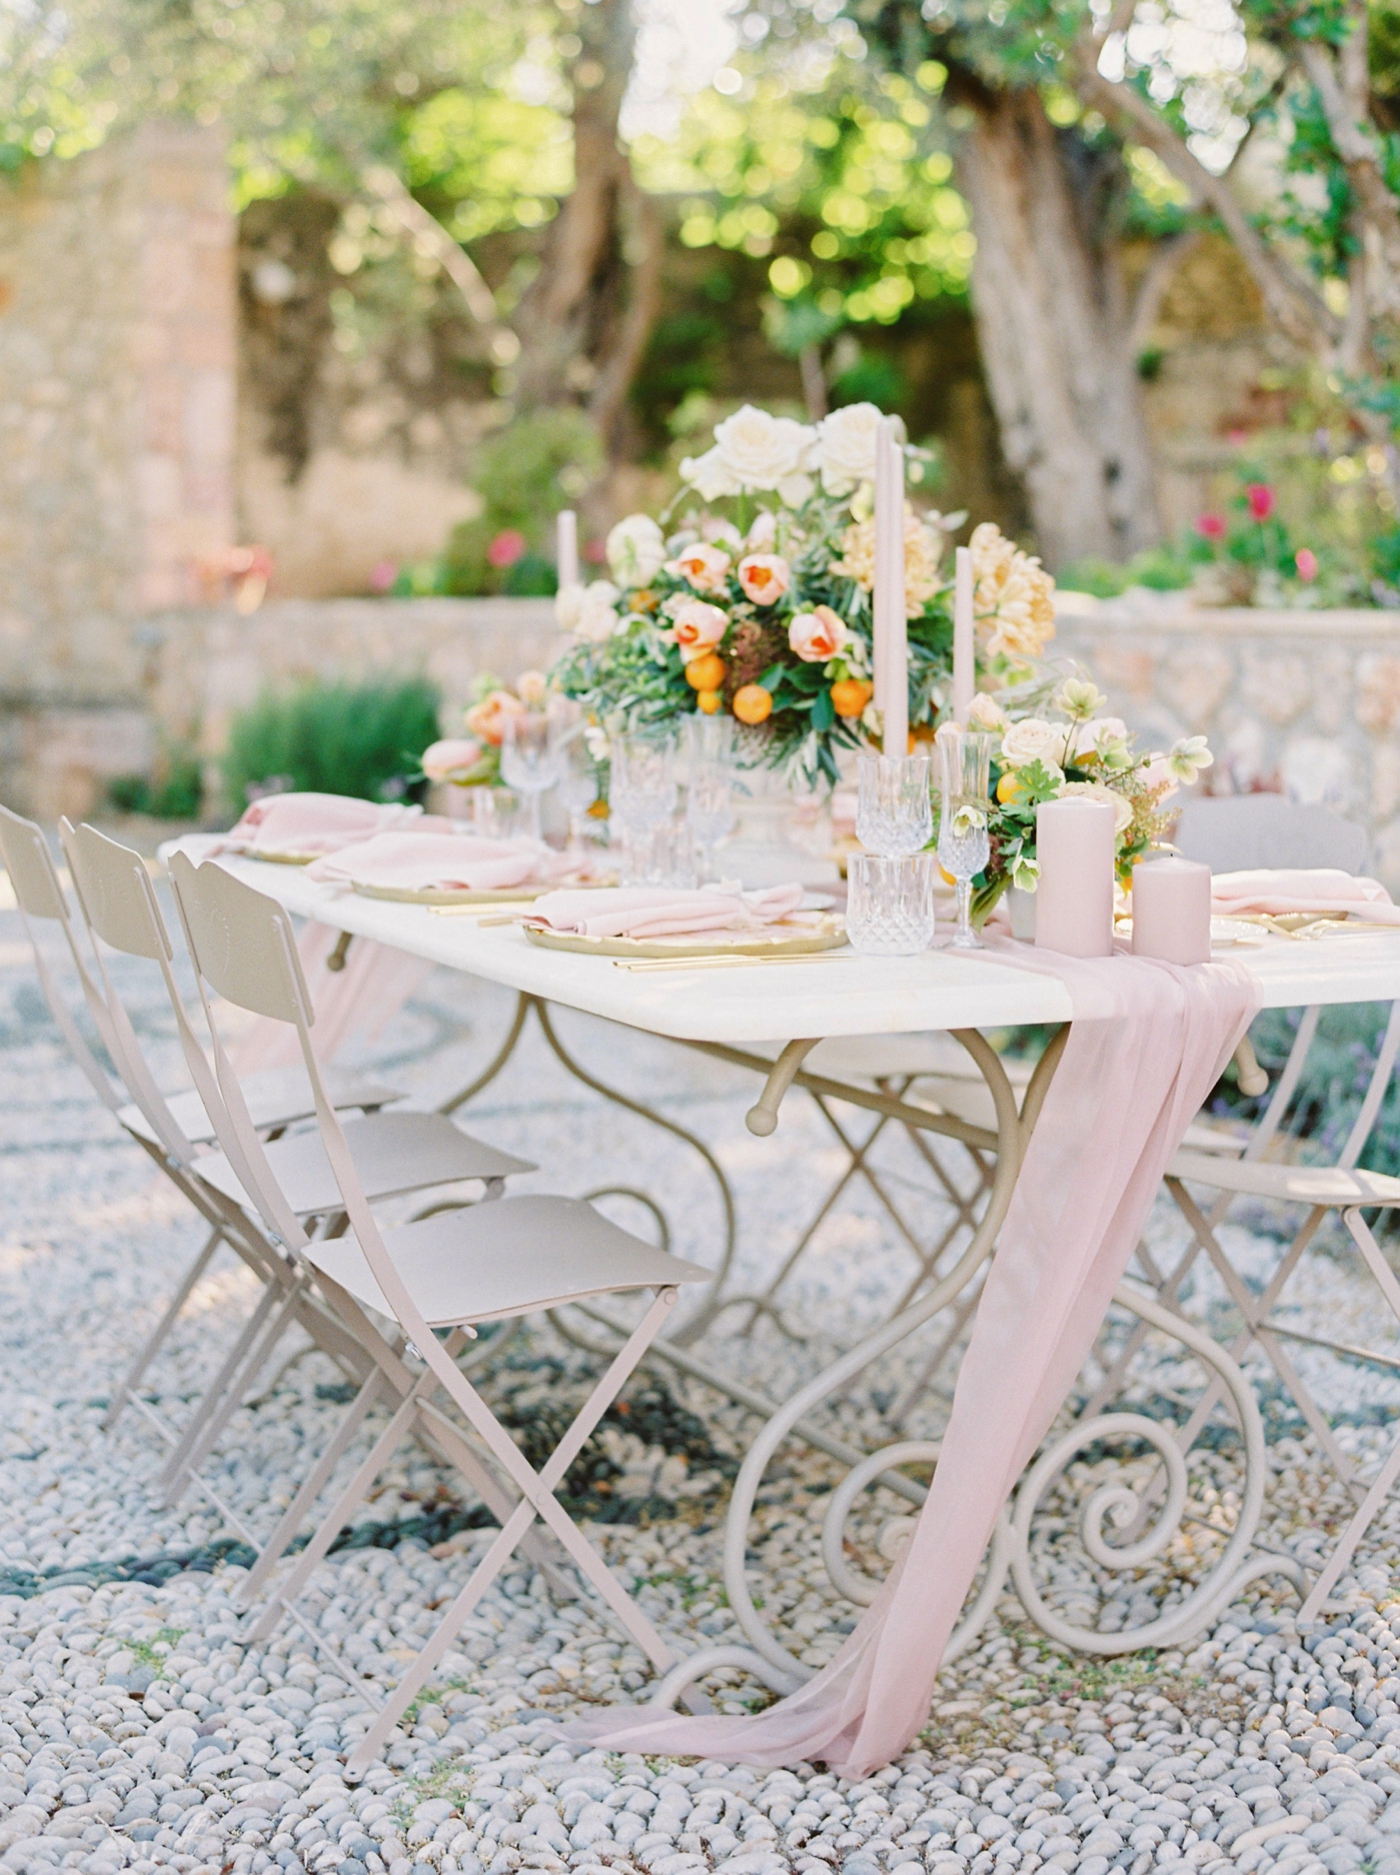 spetses greece destination wedding photographers | intimate wedding in a private villa in greece | Magnolia rouge | film photography workshop phos | Justine Milton Photography